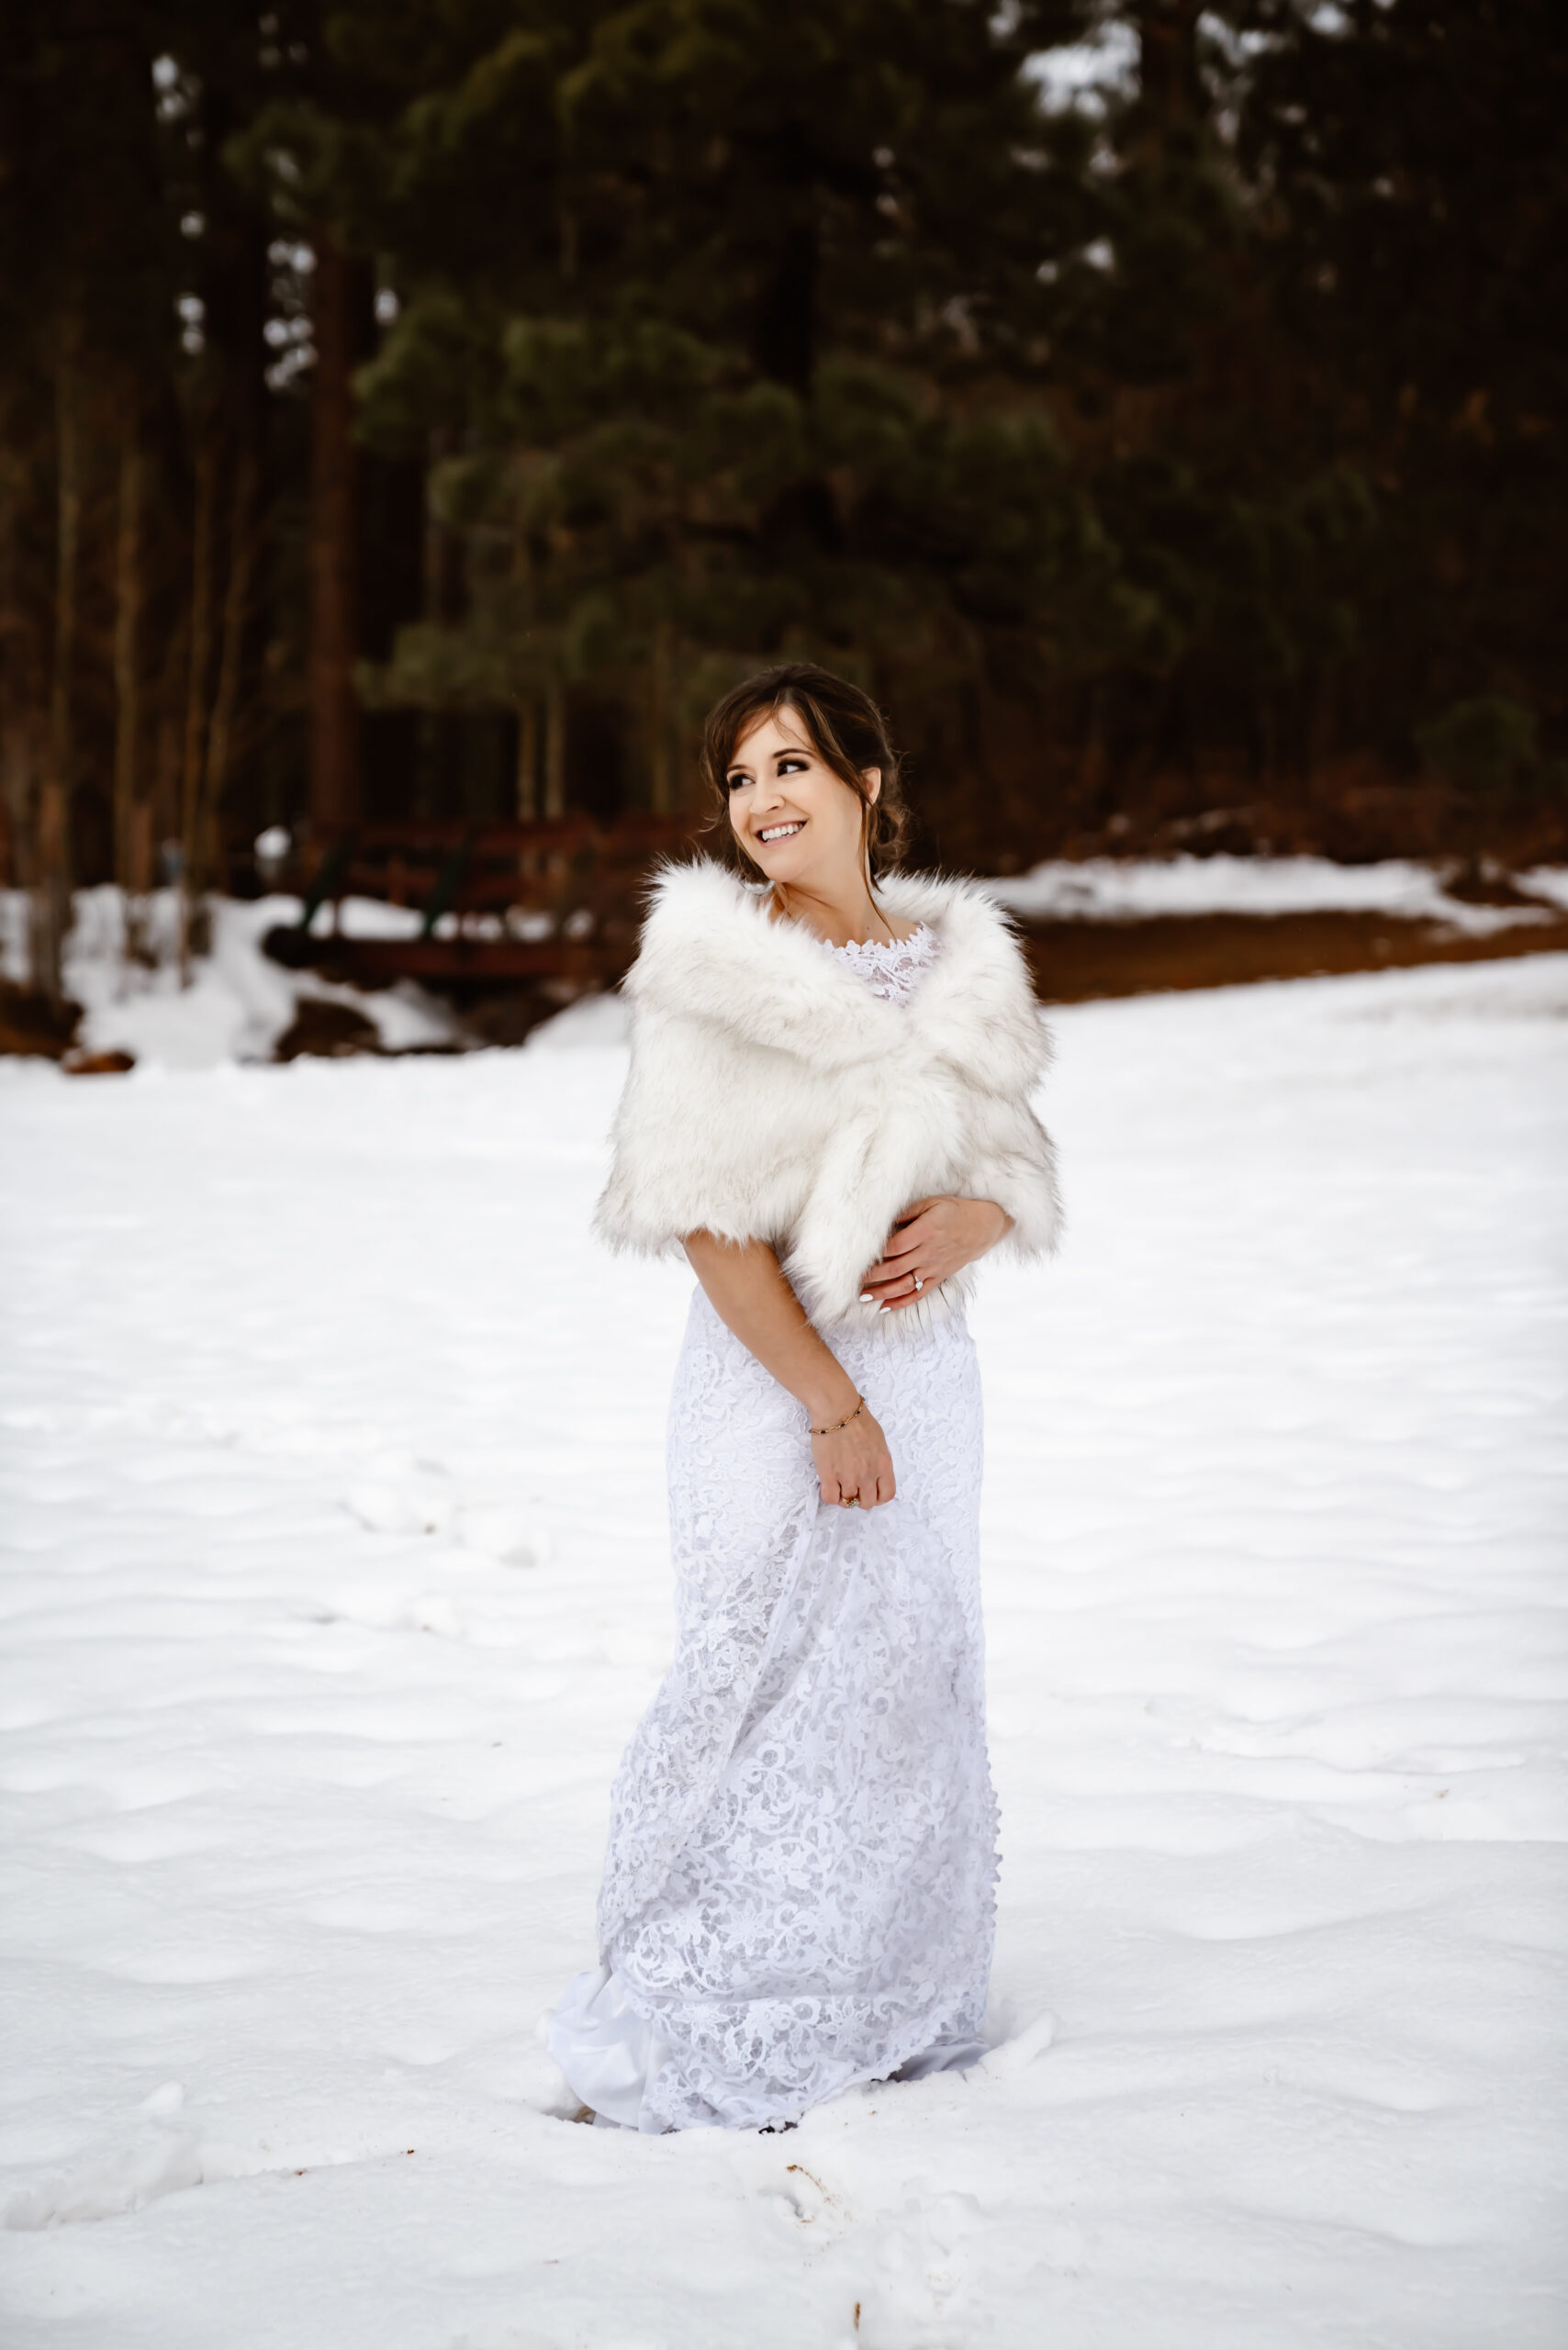 A bride wearing a lace elopement dress with a fur shawl dancing in the snow